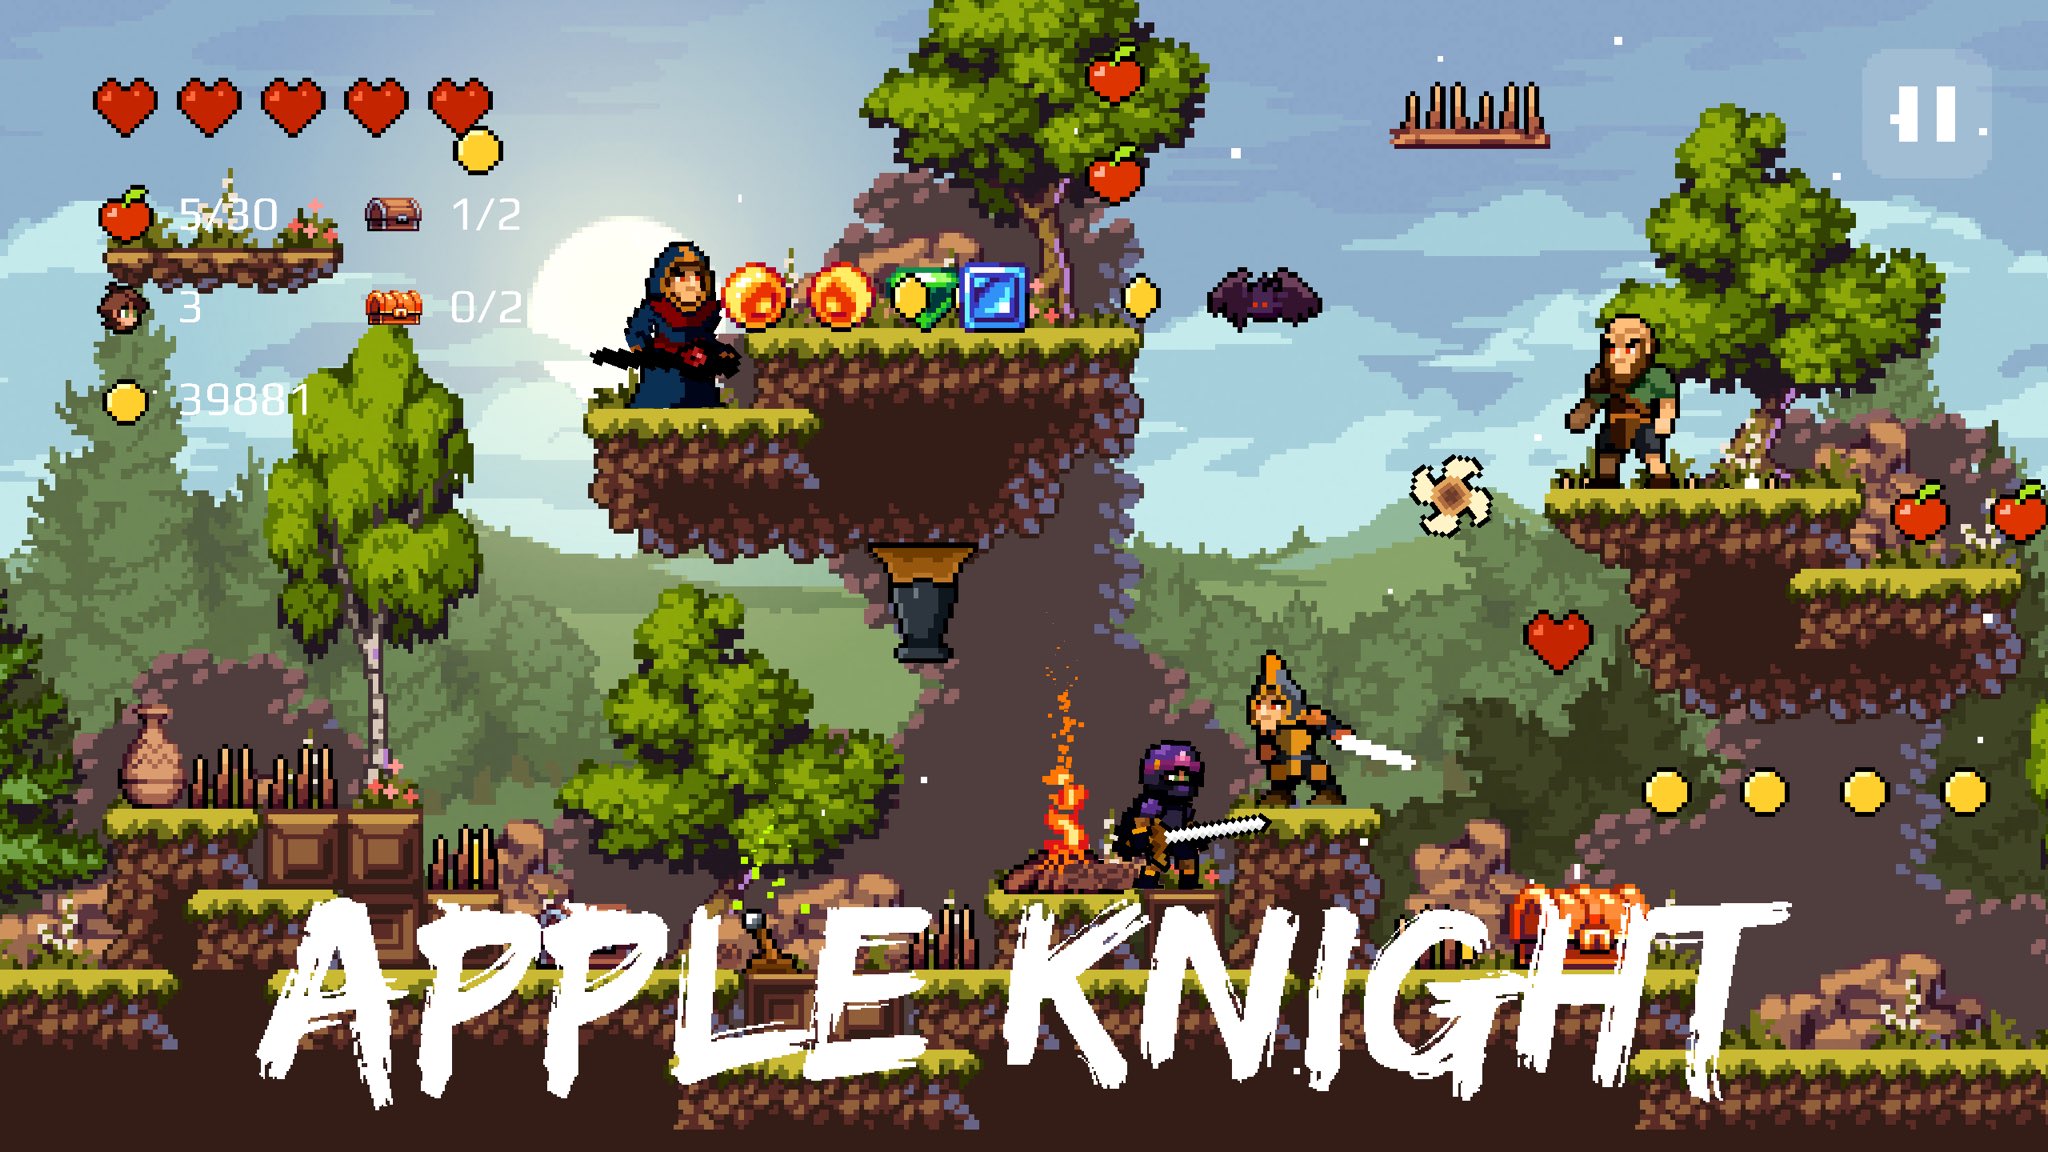 Limitless on X: Apple Knight is on iOS now